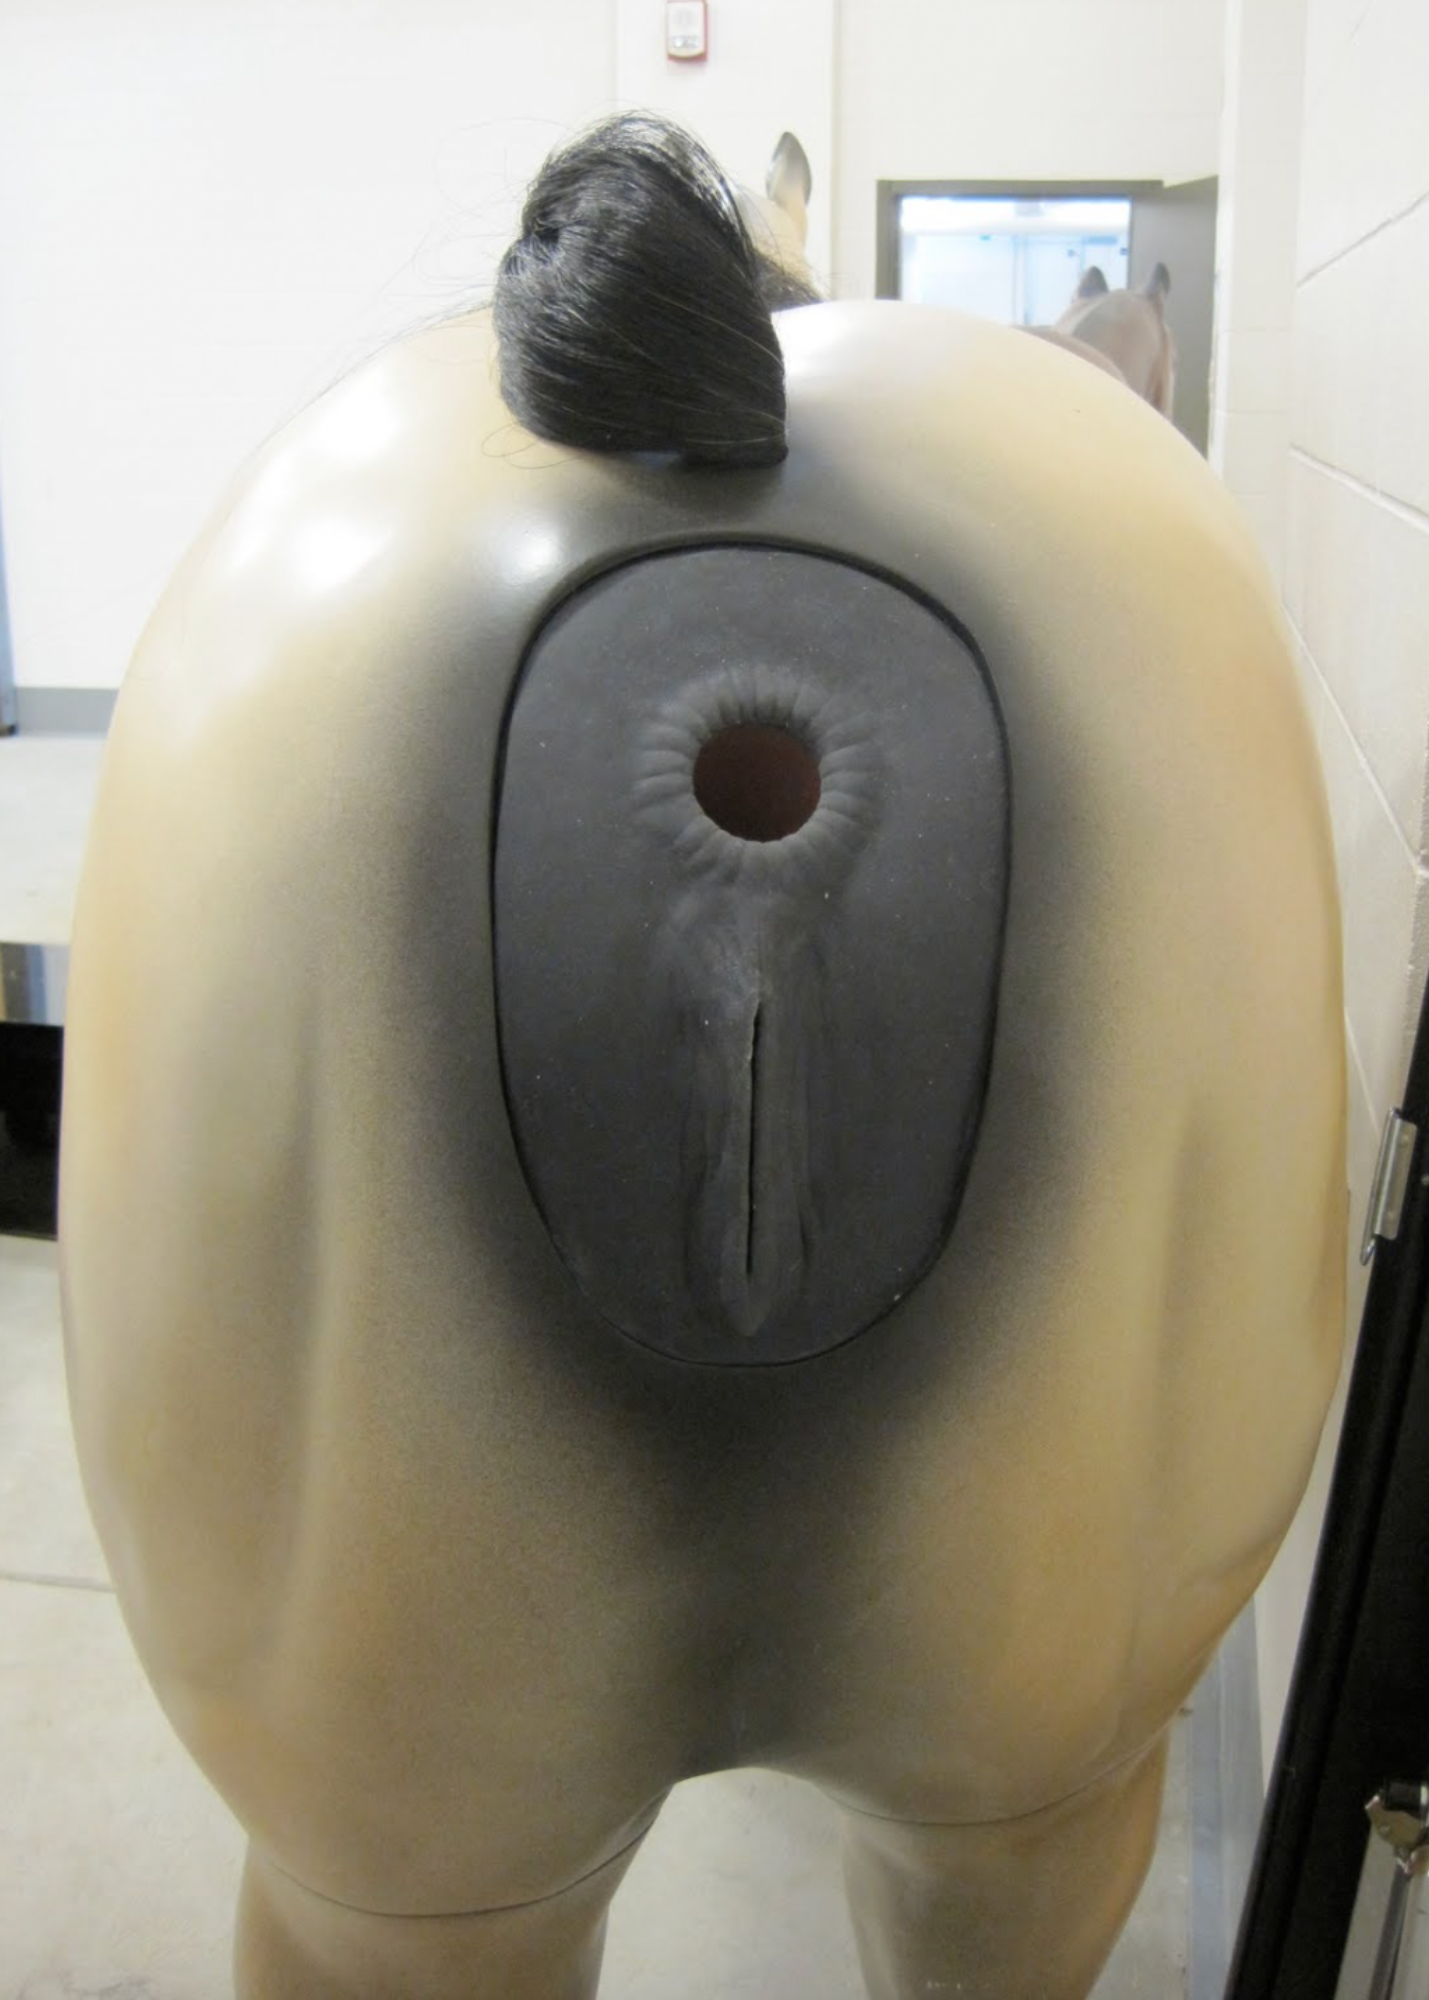 This photo shows the soft anus and vaginal opening to allow students to palpate the internal organs. The tail is real horse hair and is replaceable.